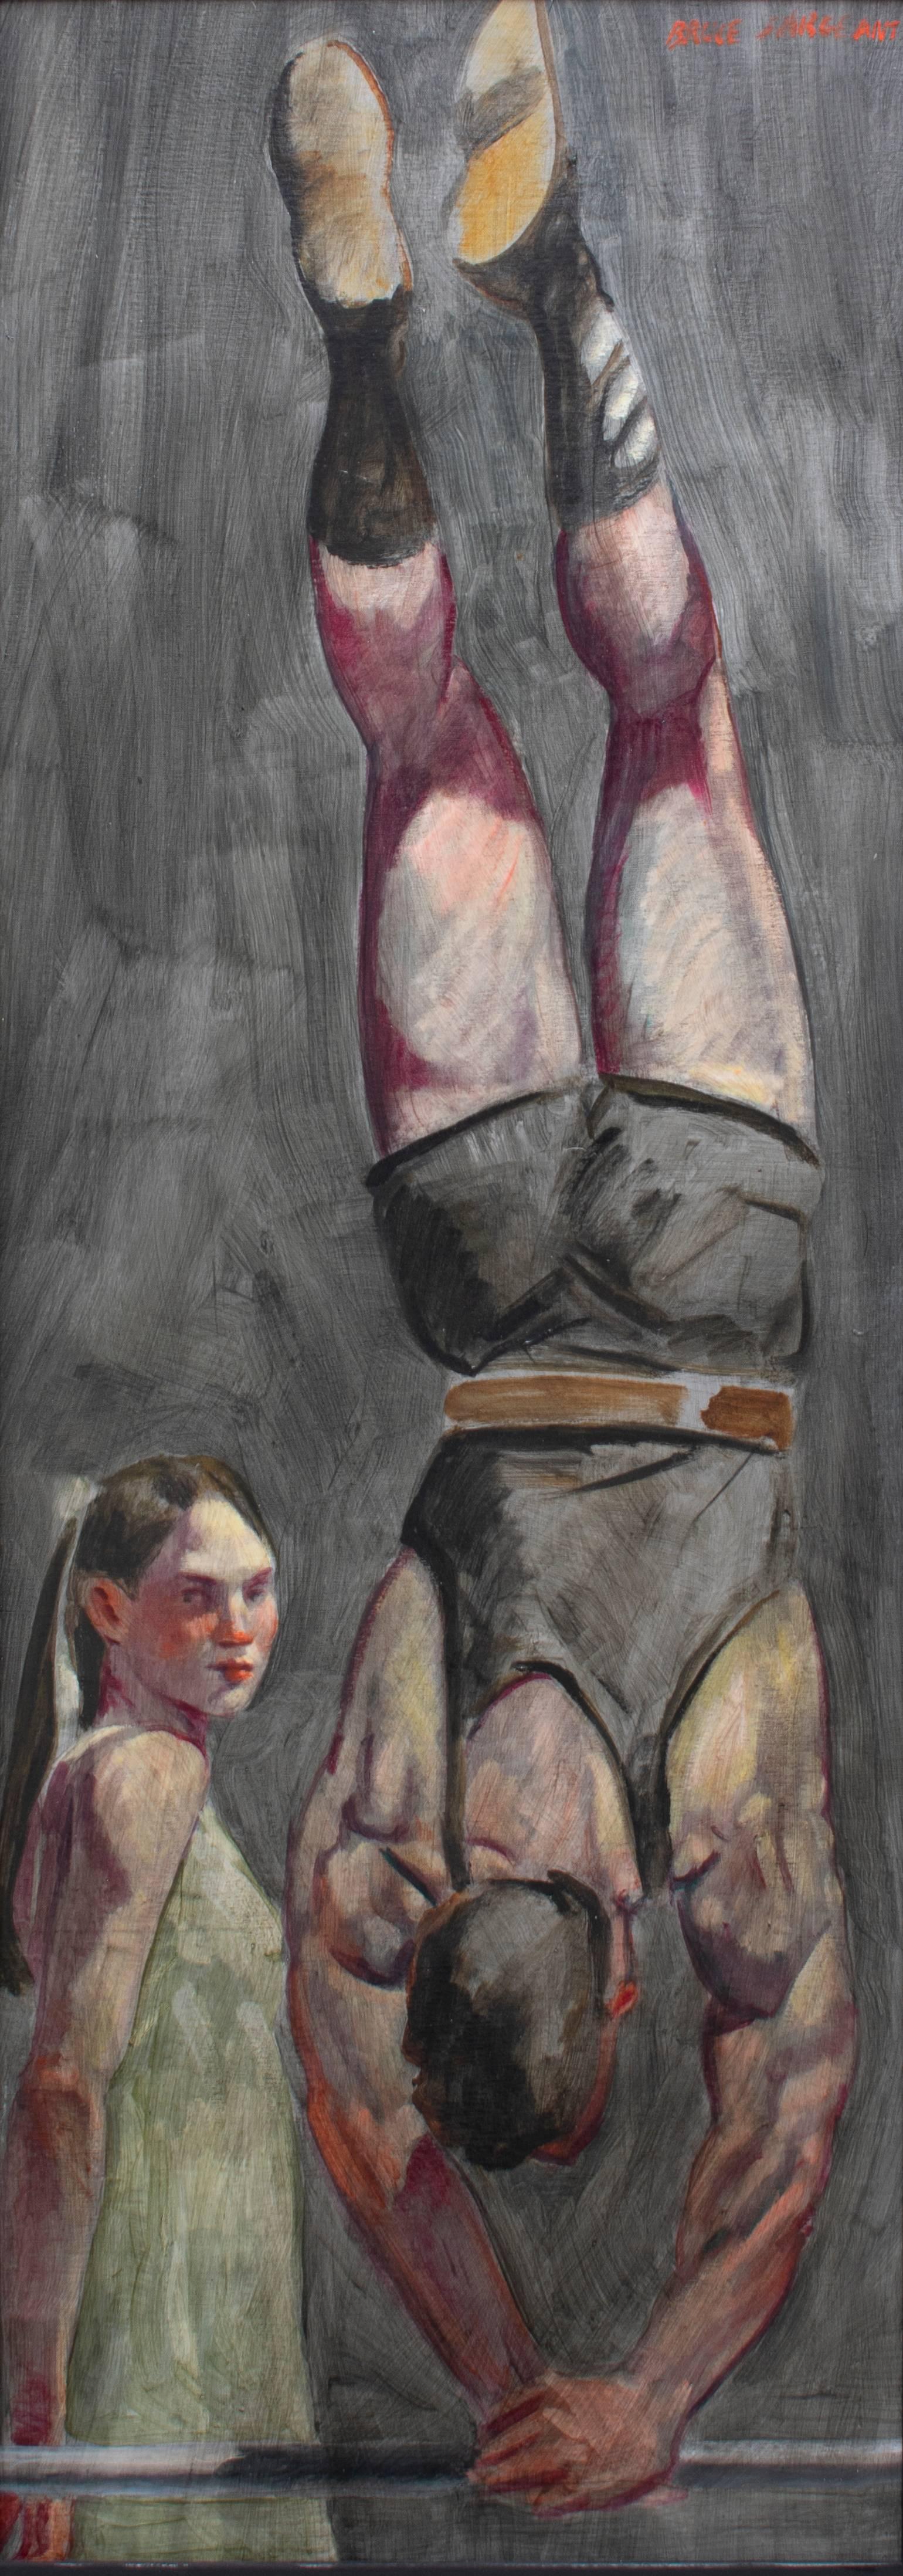 Academic style verticle figurative painting of an athletic male model doing a handstand next to a girl.
oil on canvas
55 X 19 1/2" inches
63 x 27.5 x 3 inches framed

This painting is a selection from a large mural the artist was commissioned to